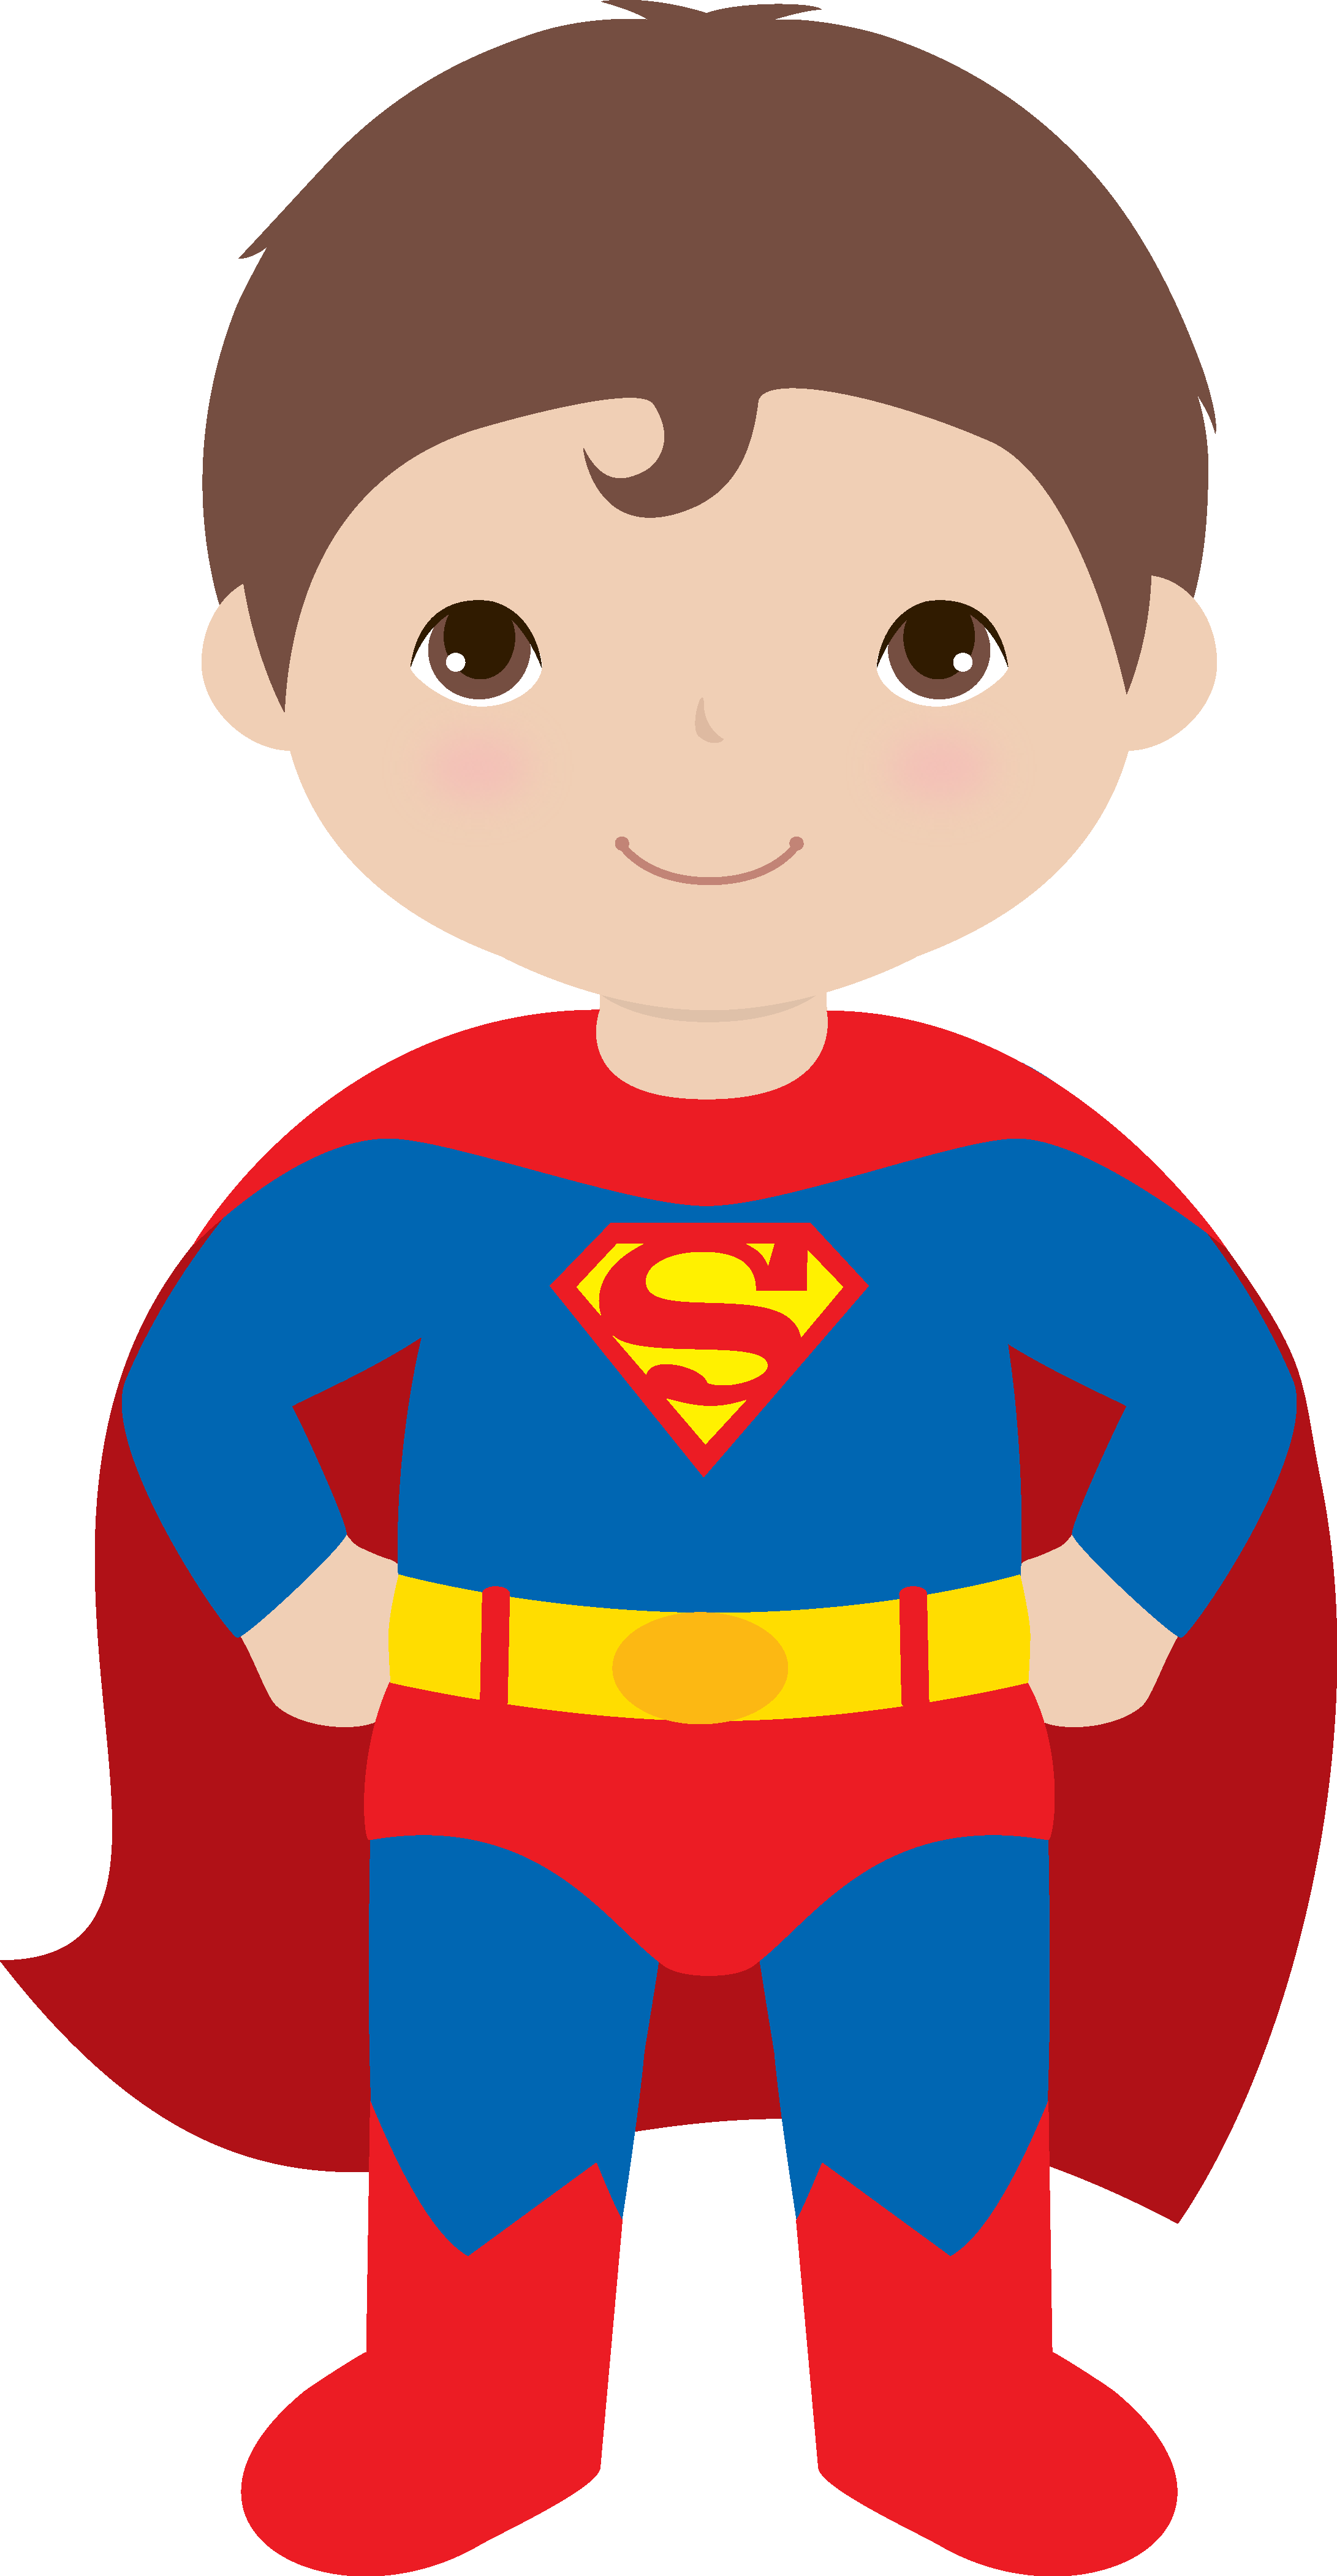 Pin by amy bailey. Supergirl clipart supe boy